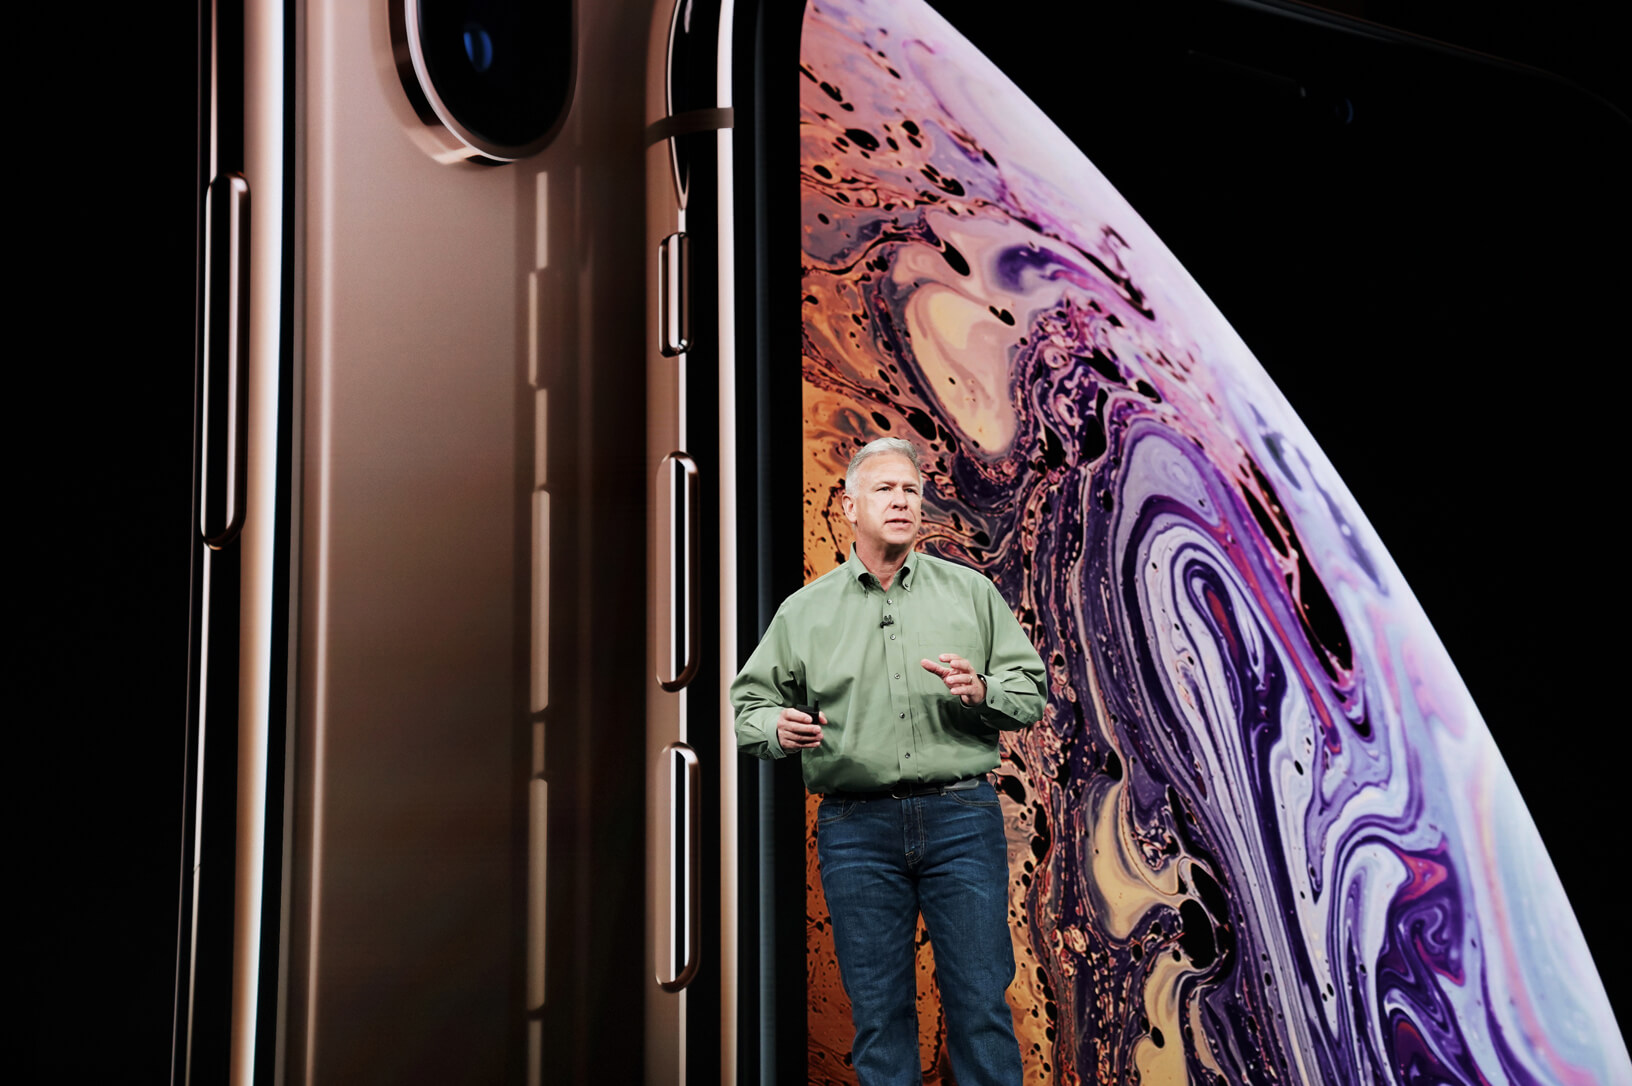 Ming-Chi Kuo says that all three new iPhones coming in 2020 will support 5G